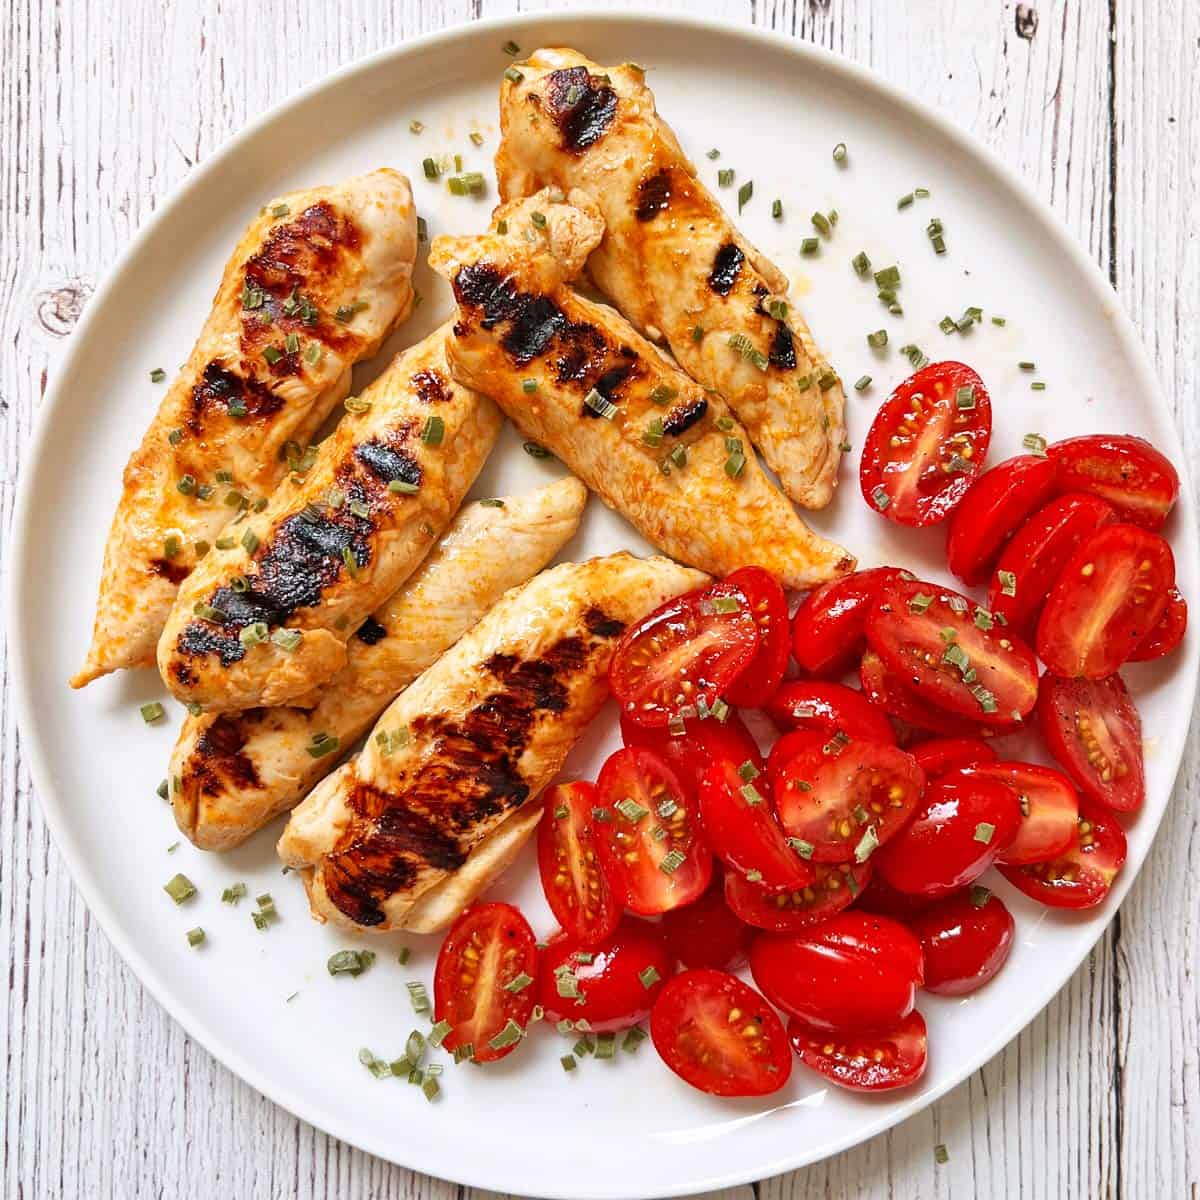 Grilled chicken tenders are served with a tomato salad.